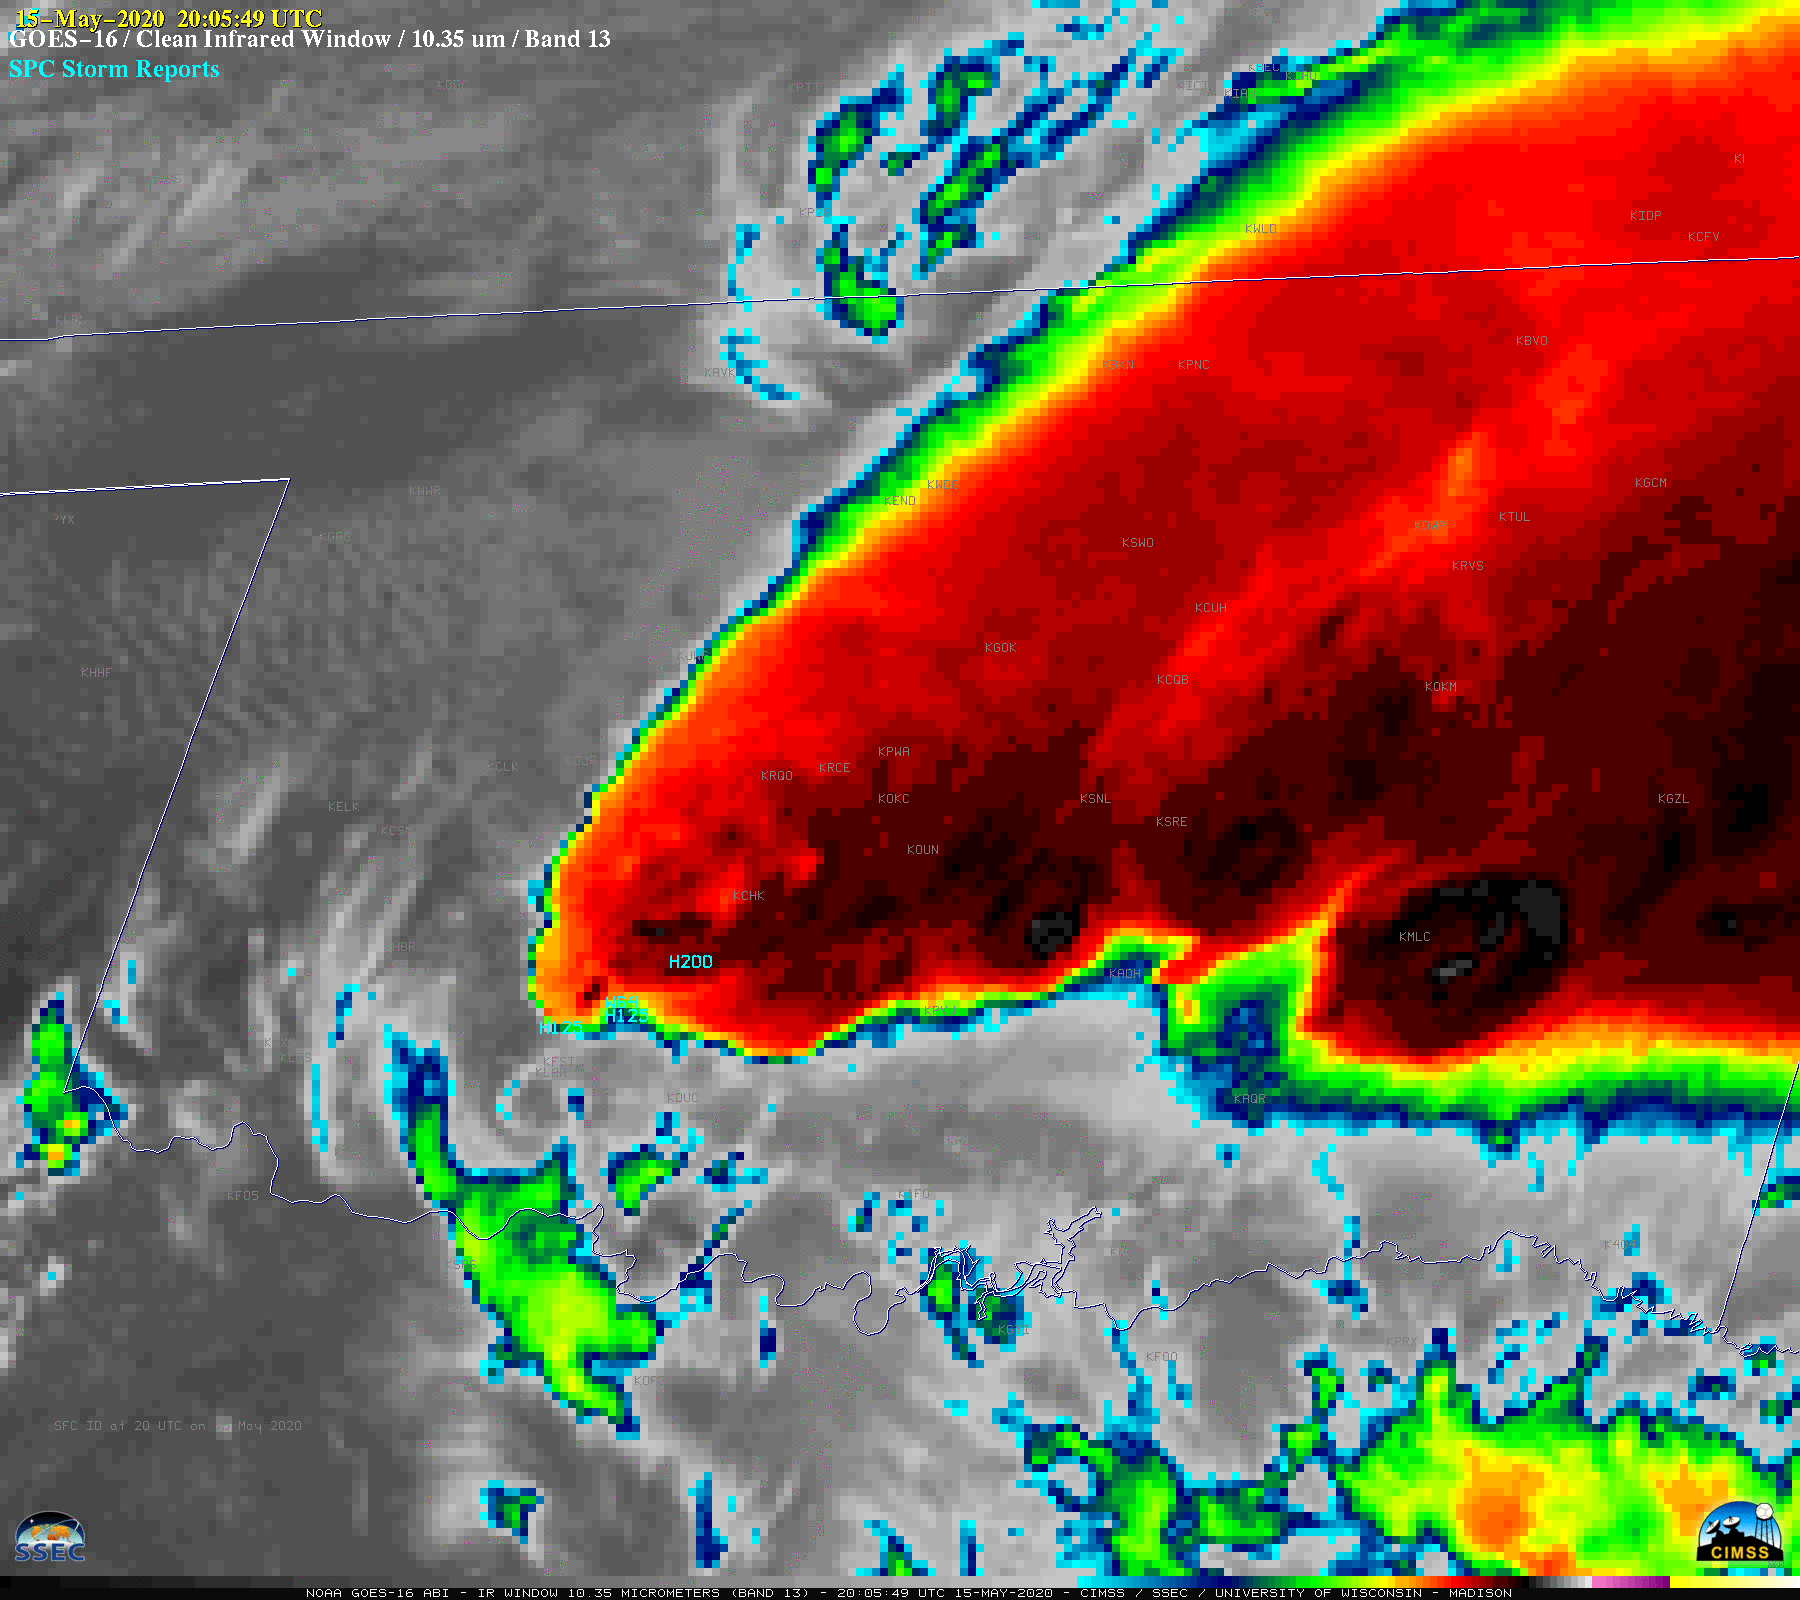 GOES-16 "Clean" Infrared Window (10.35 µm) images, with SPC Storm Reports plotted in cyan [click to play animation | MP4]